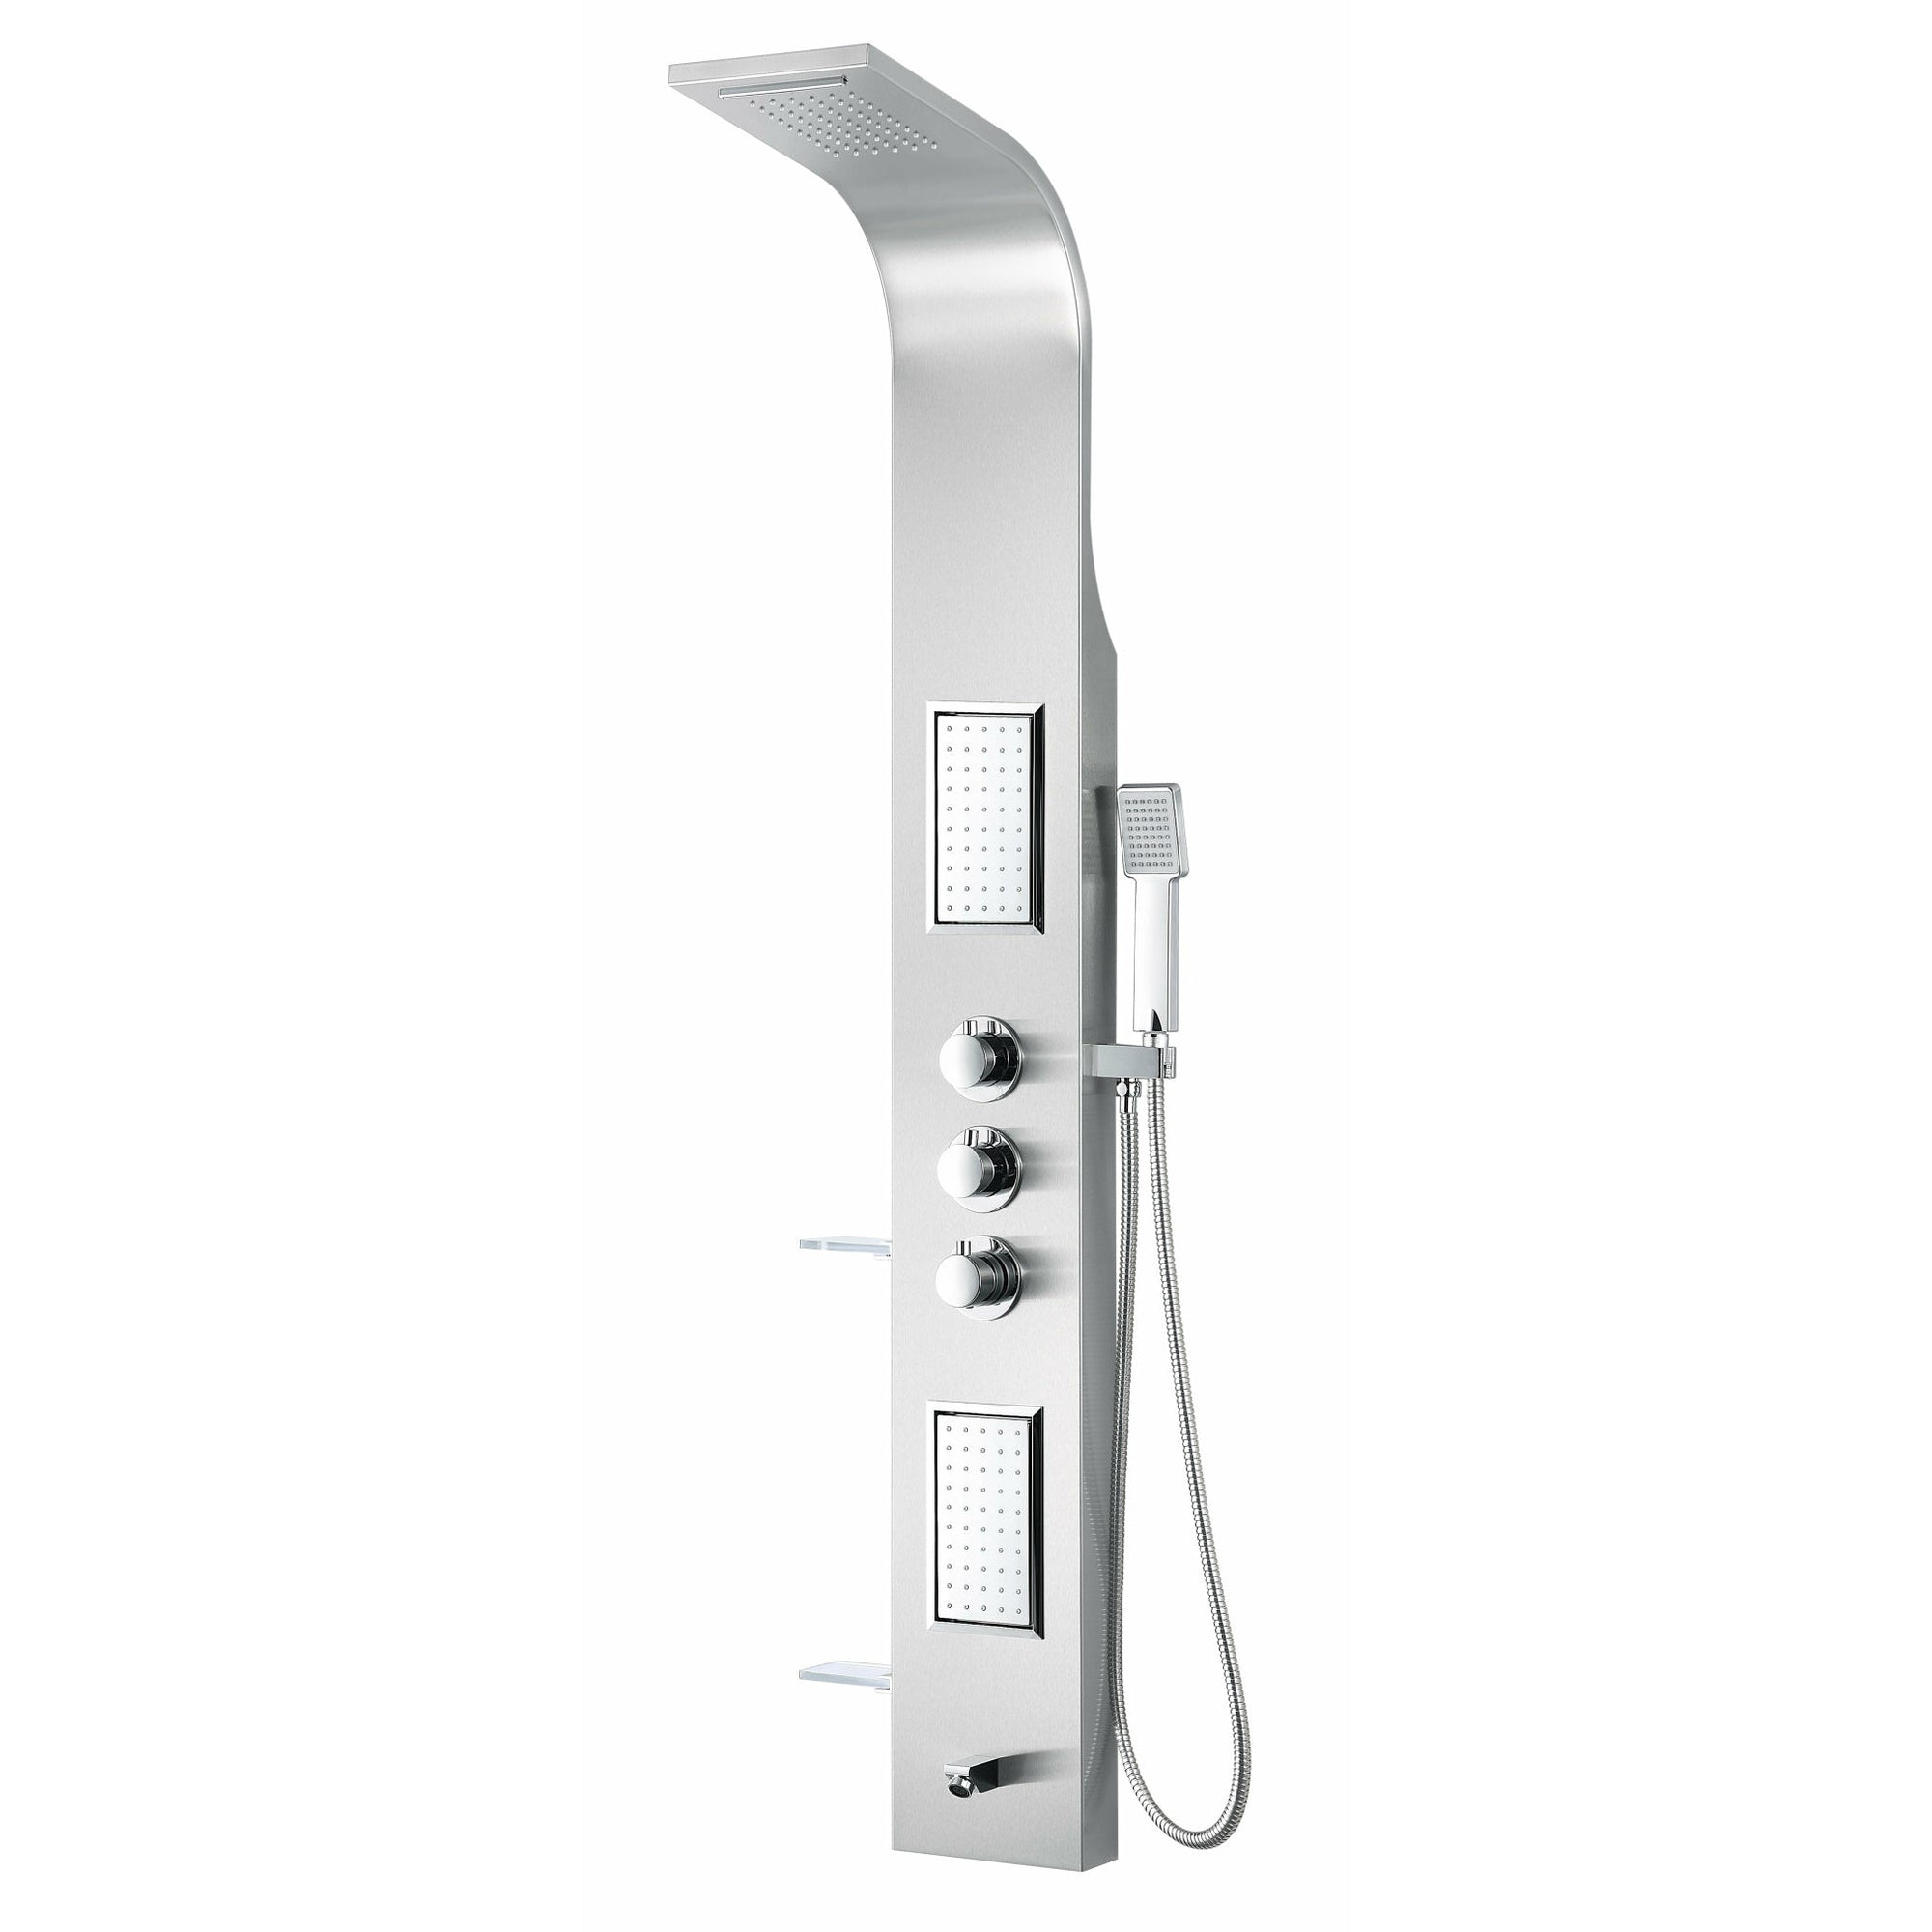 Anzzi Field 58 Inch Full Body Shower Panel with Heavy Rain Shower Head with Cascading Waterfall, Three Shower Control Knobs, Two Acu-stream Vector Massage Body Jet Sets and One Euro-grip Free Range Hand Sprayer in Brushed Steel - Dual Level Deco-Glass Shampoo Shelves - SP-AZ042 - Vital Hydrotherapy